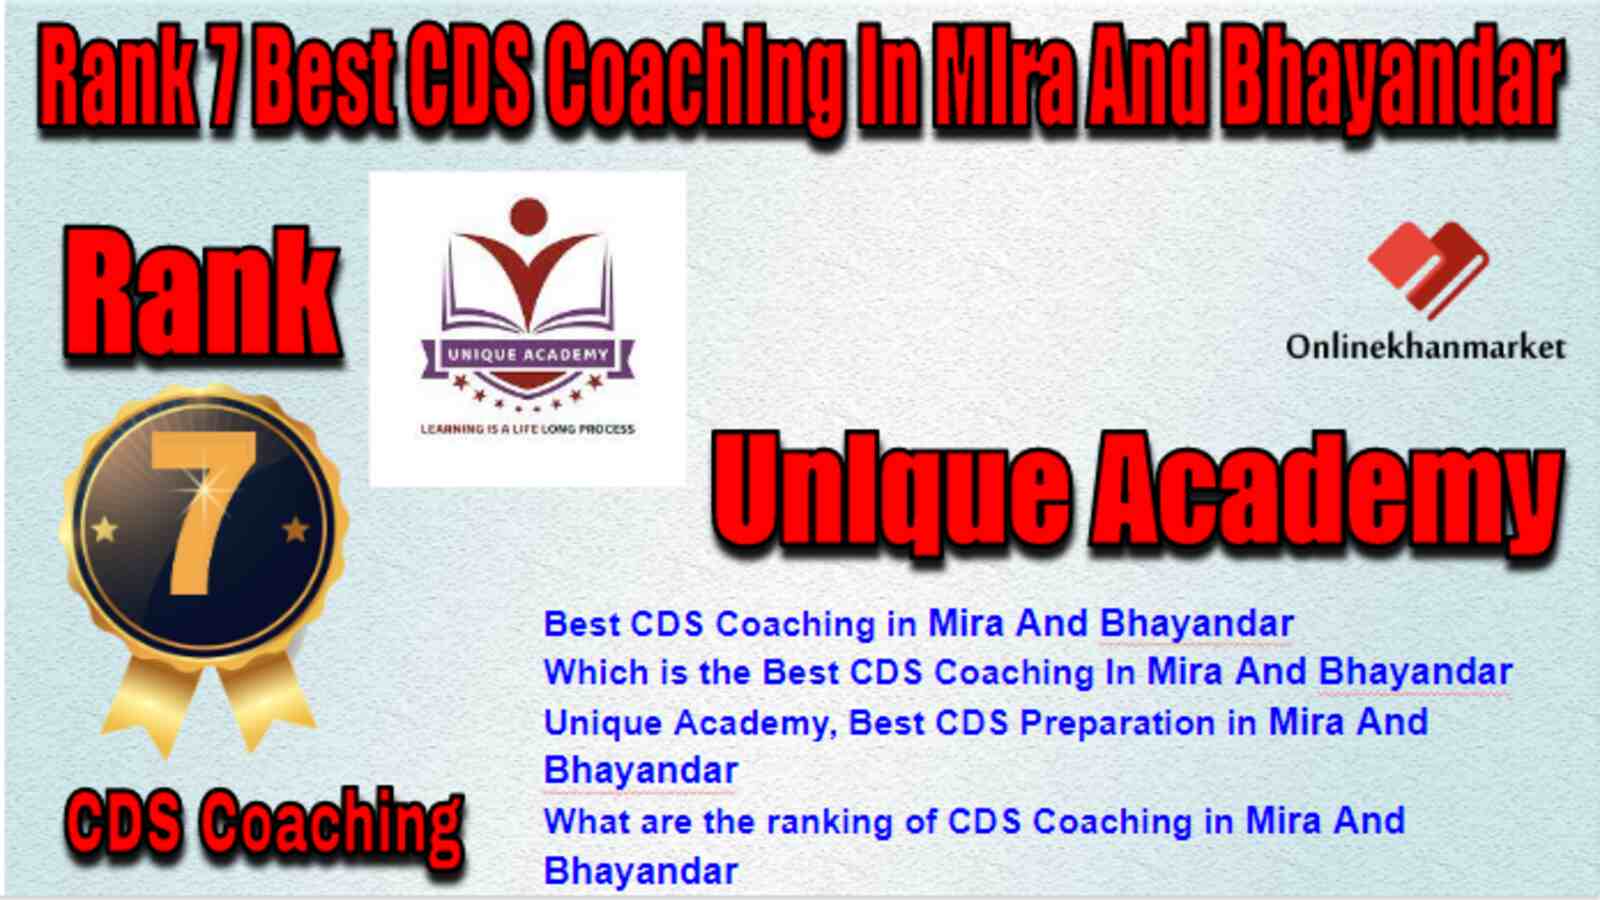 Rank 7 Best CDS Coaching in Mira and Bhayandar